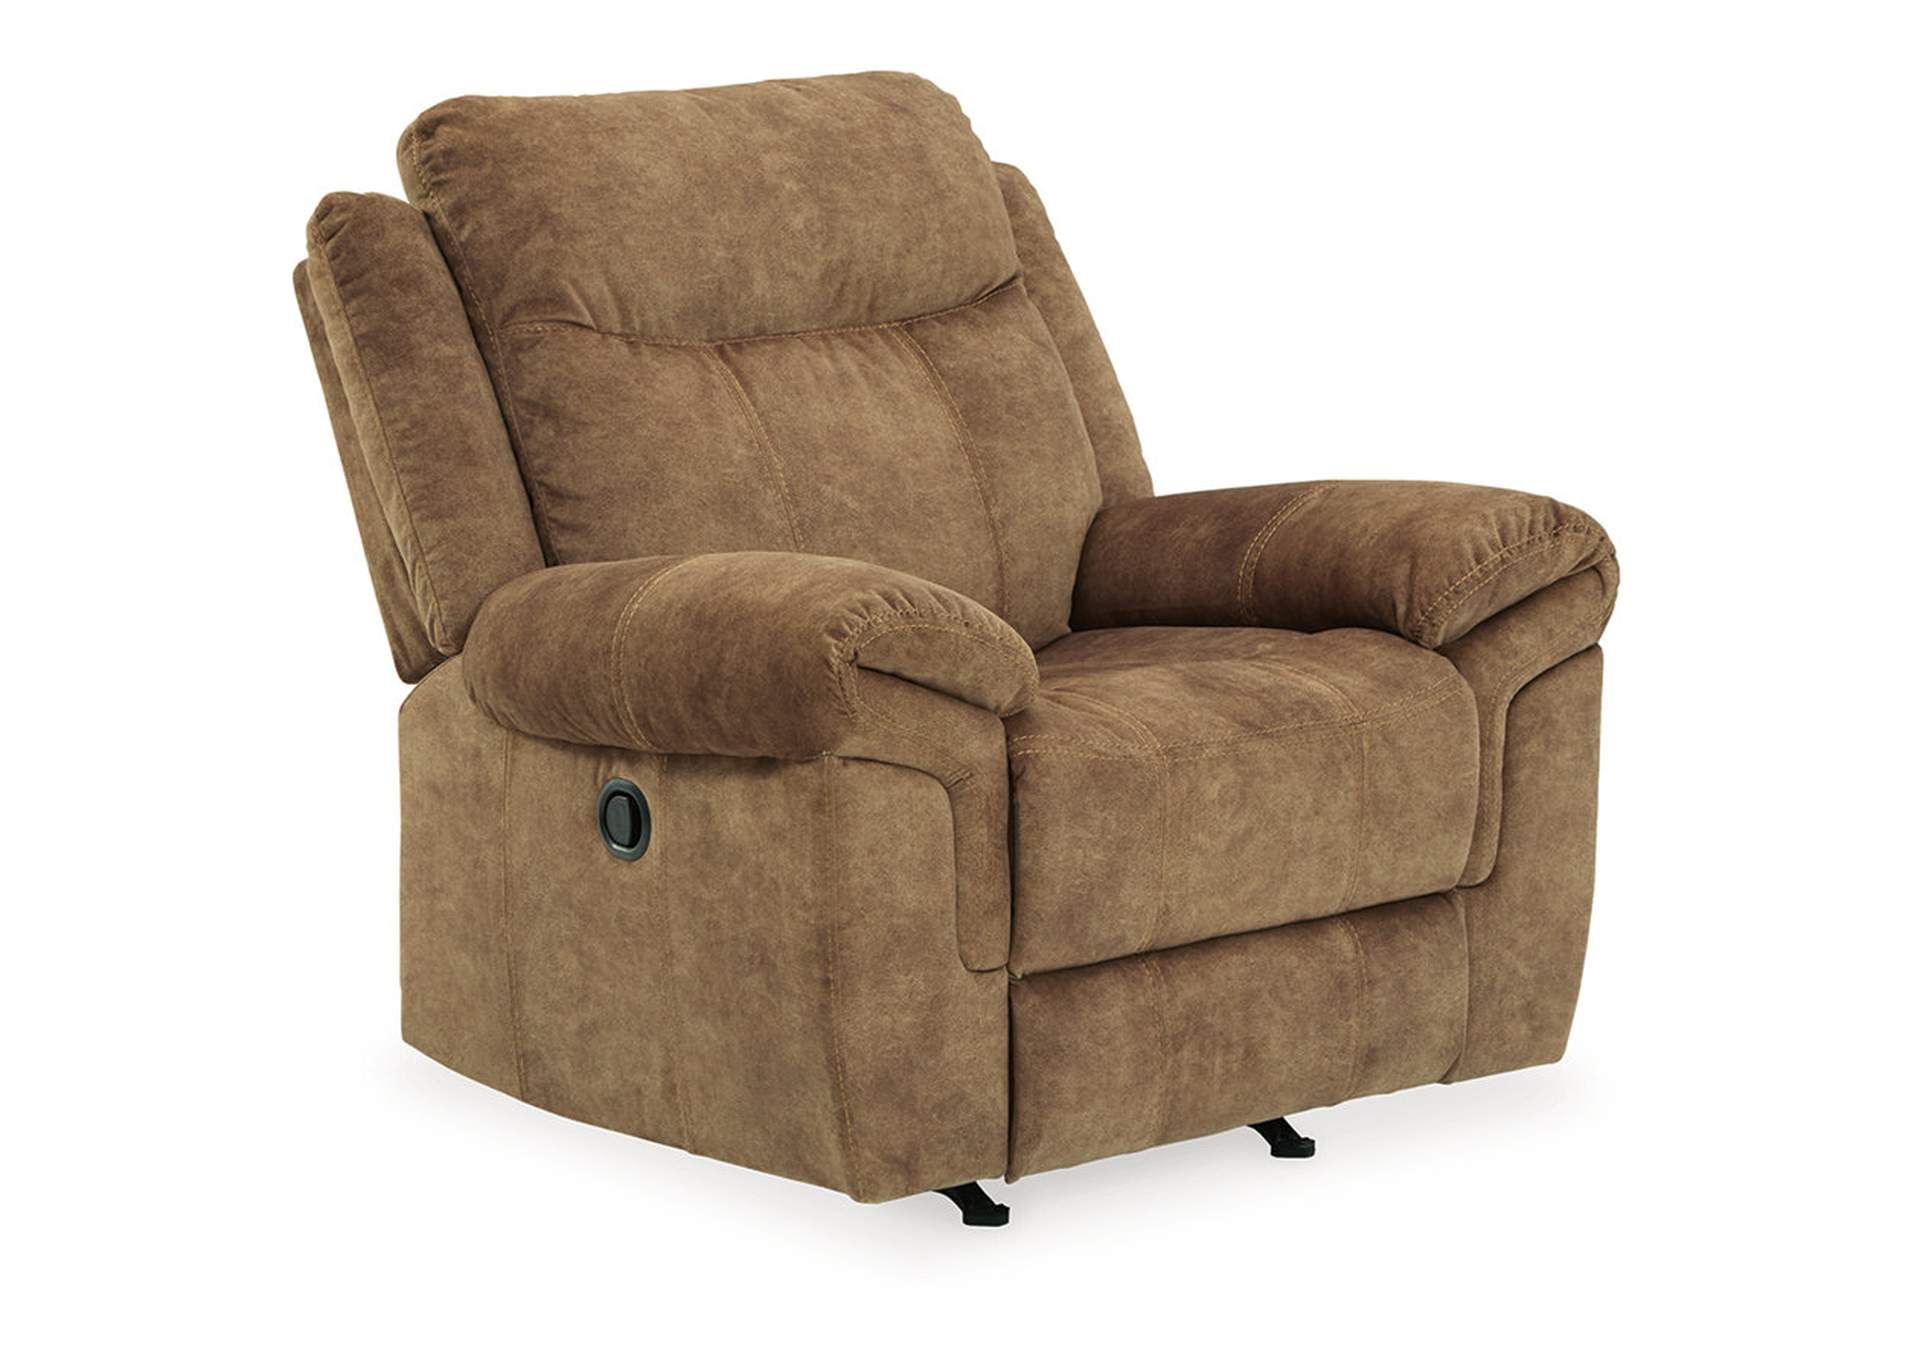 Huddle-Up Recliner,Signature Design By Ashley